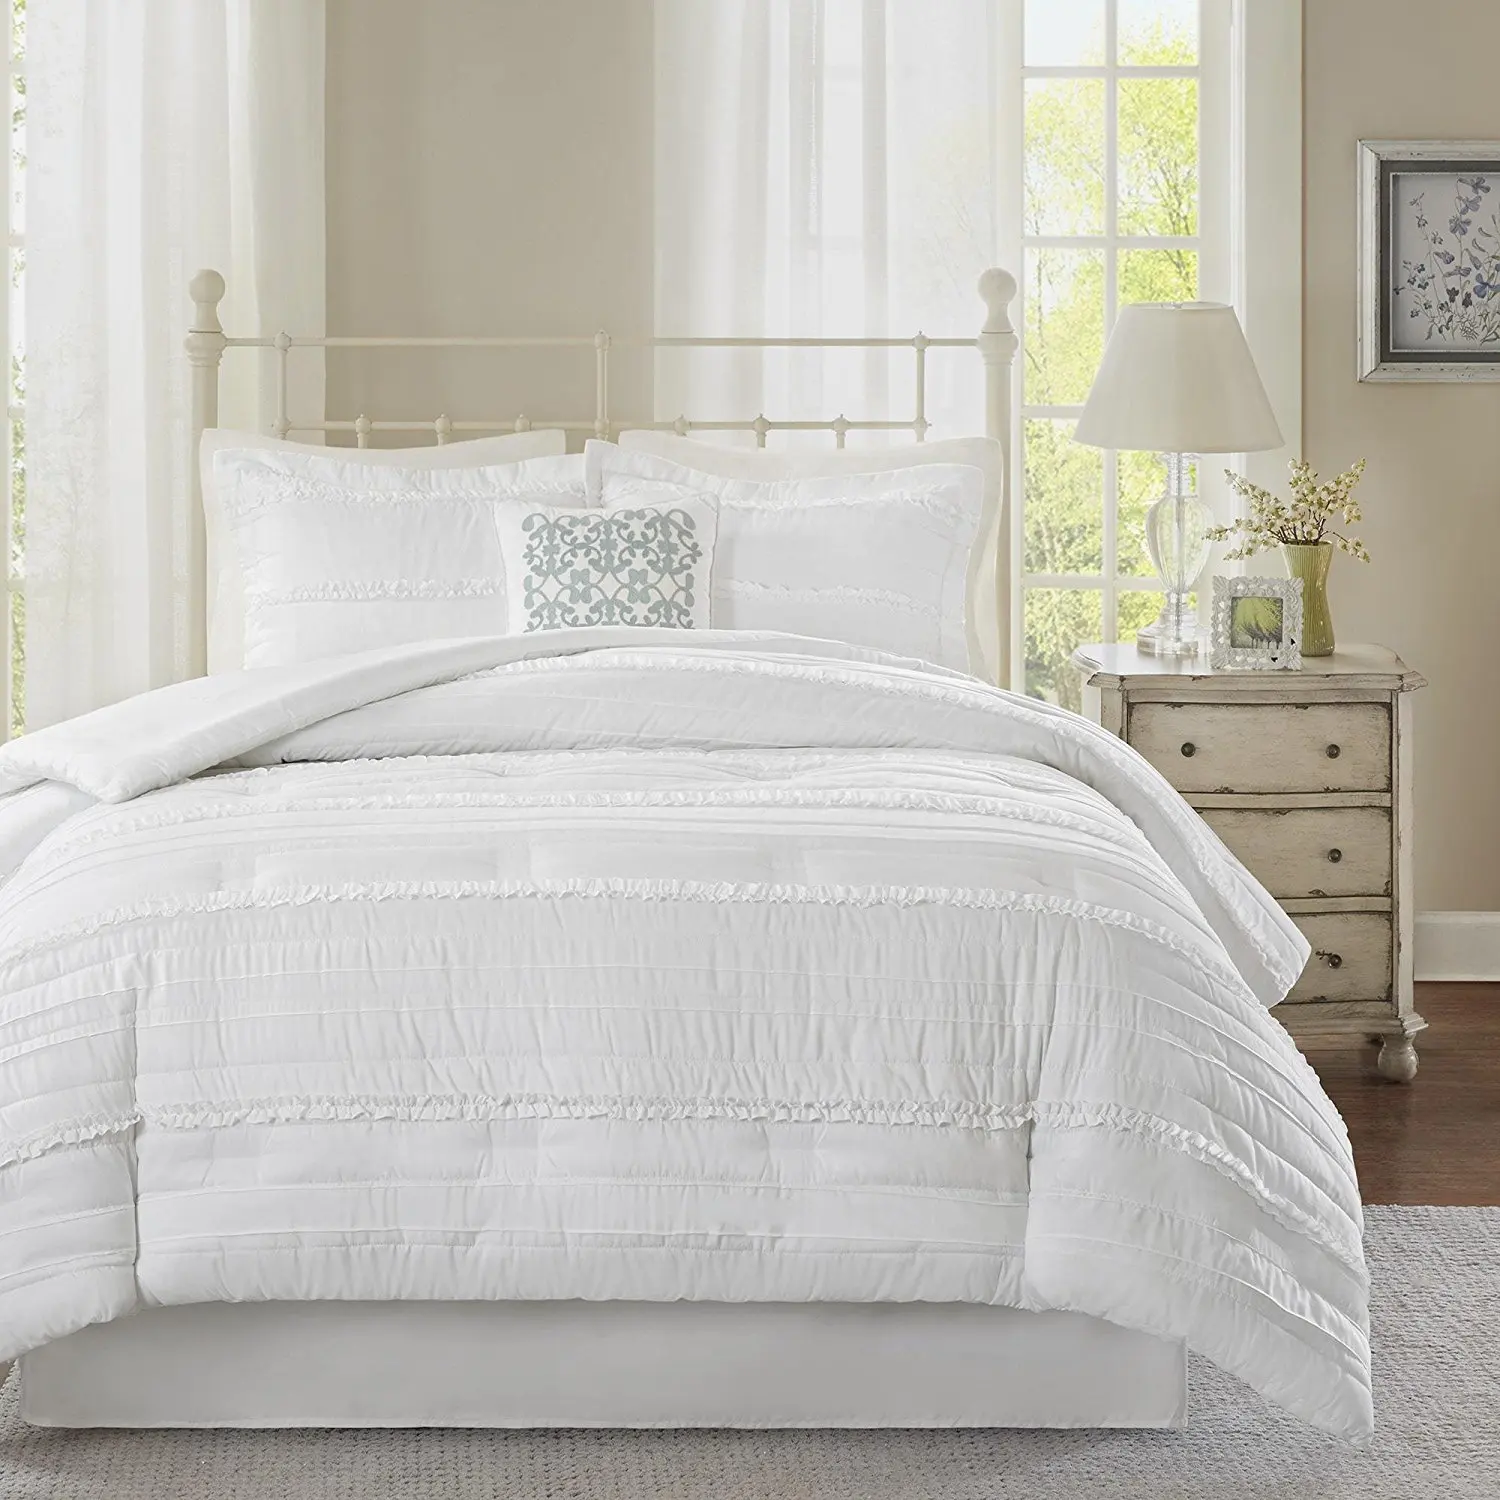 White New Ruched Bedspread Quilt Set Bed Cover Ruffle Top Design